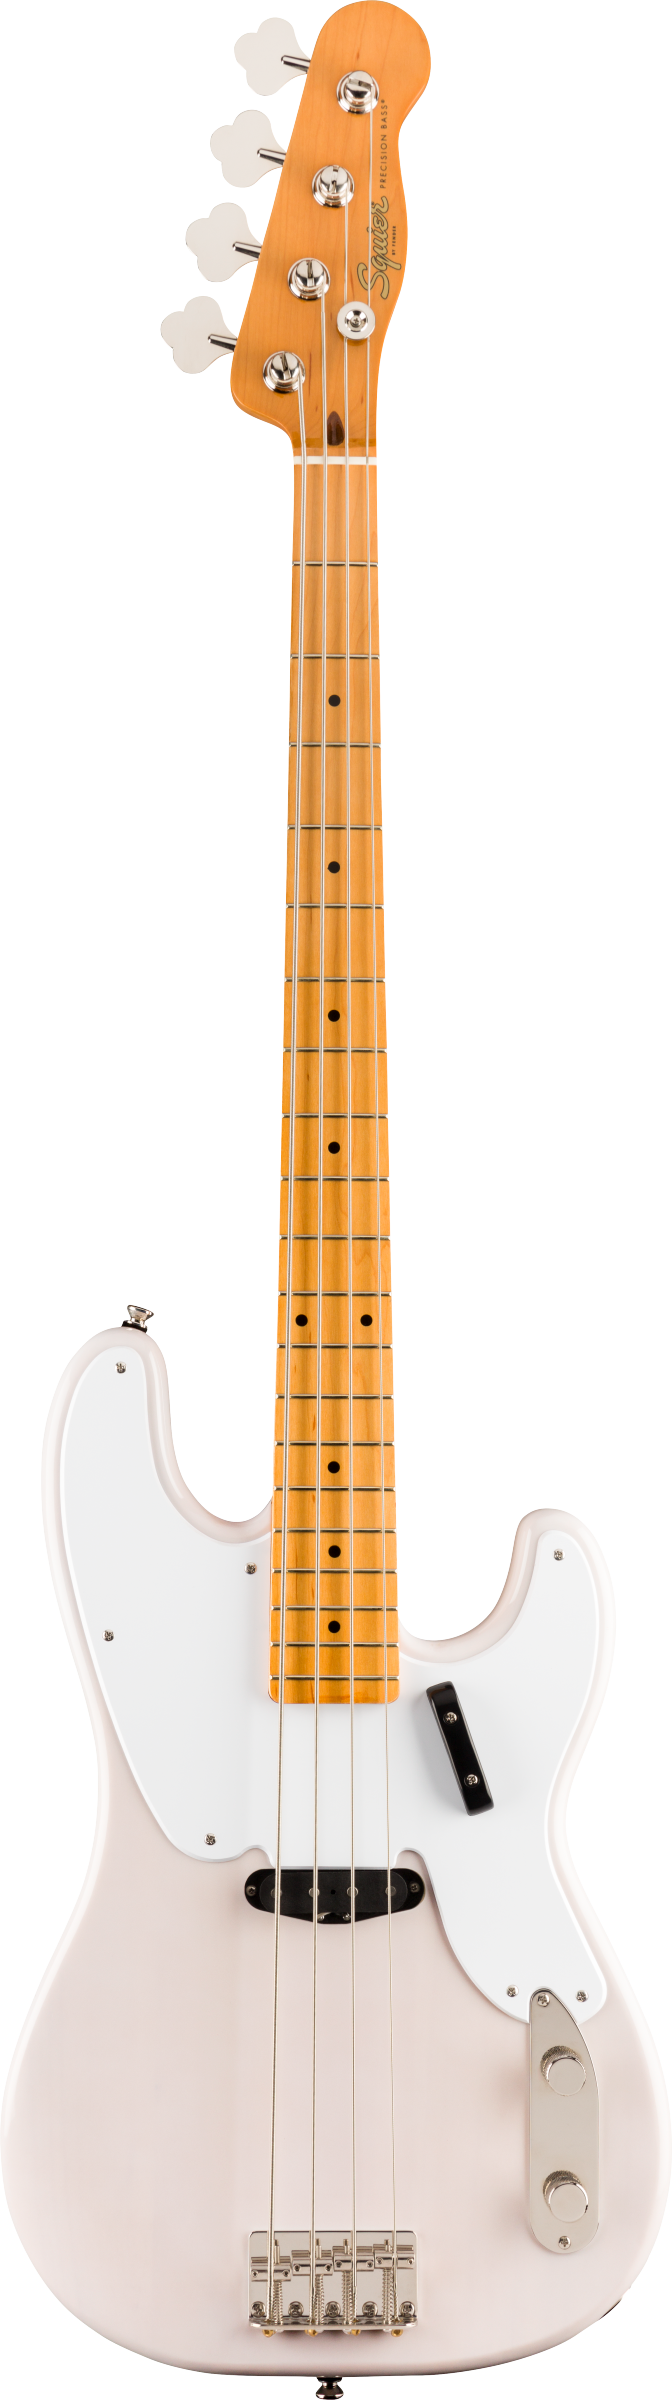 SQUIER CLASSIC VIBE '50s PRECISION BASS MN WHITE BLONDE